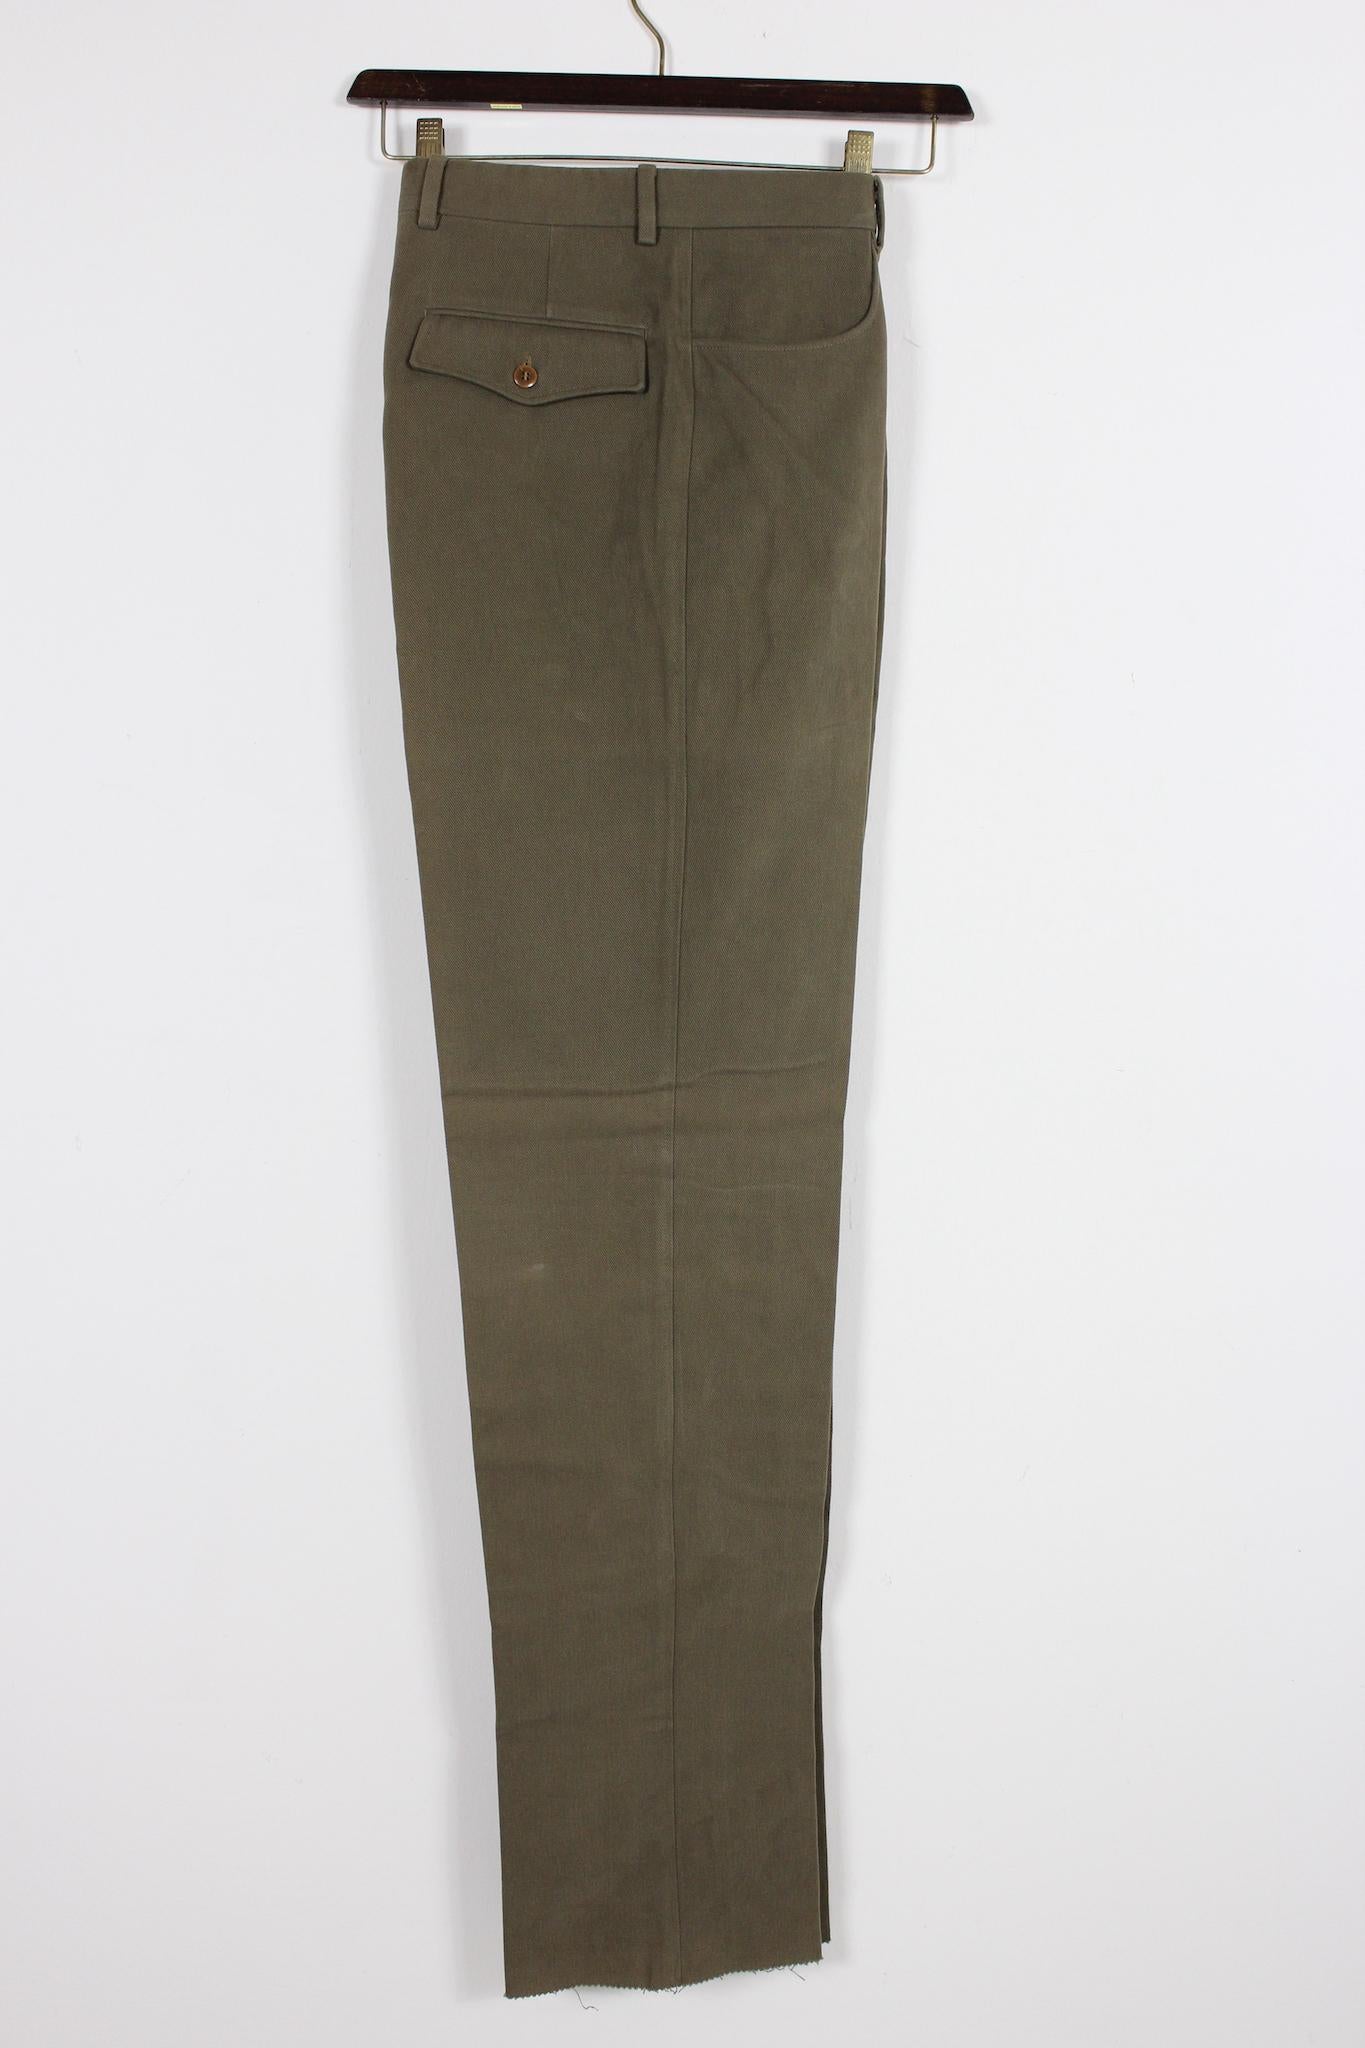 Brioni classic vintage 90s green trousers. Green color, button and zip closure, 100% heavy cotton fabric. Made in Italy.

Size: 48 It 38 Us 38 Uk

Waist: 40 cm
Length: 120 cm
Hem: 20 cm
Pant crotch: 93 cm